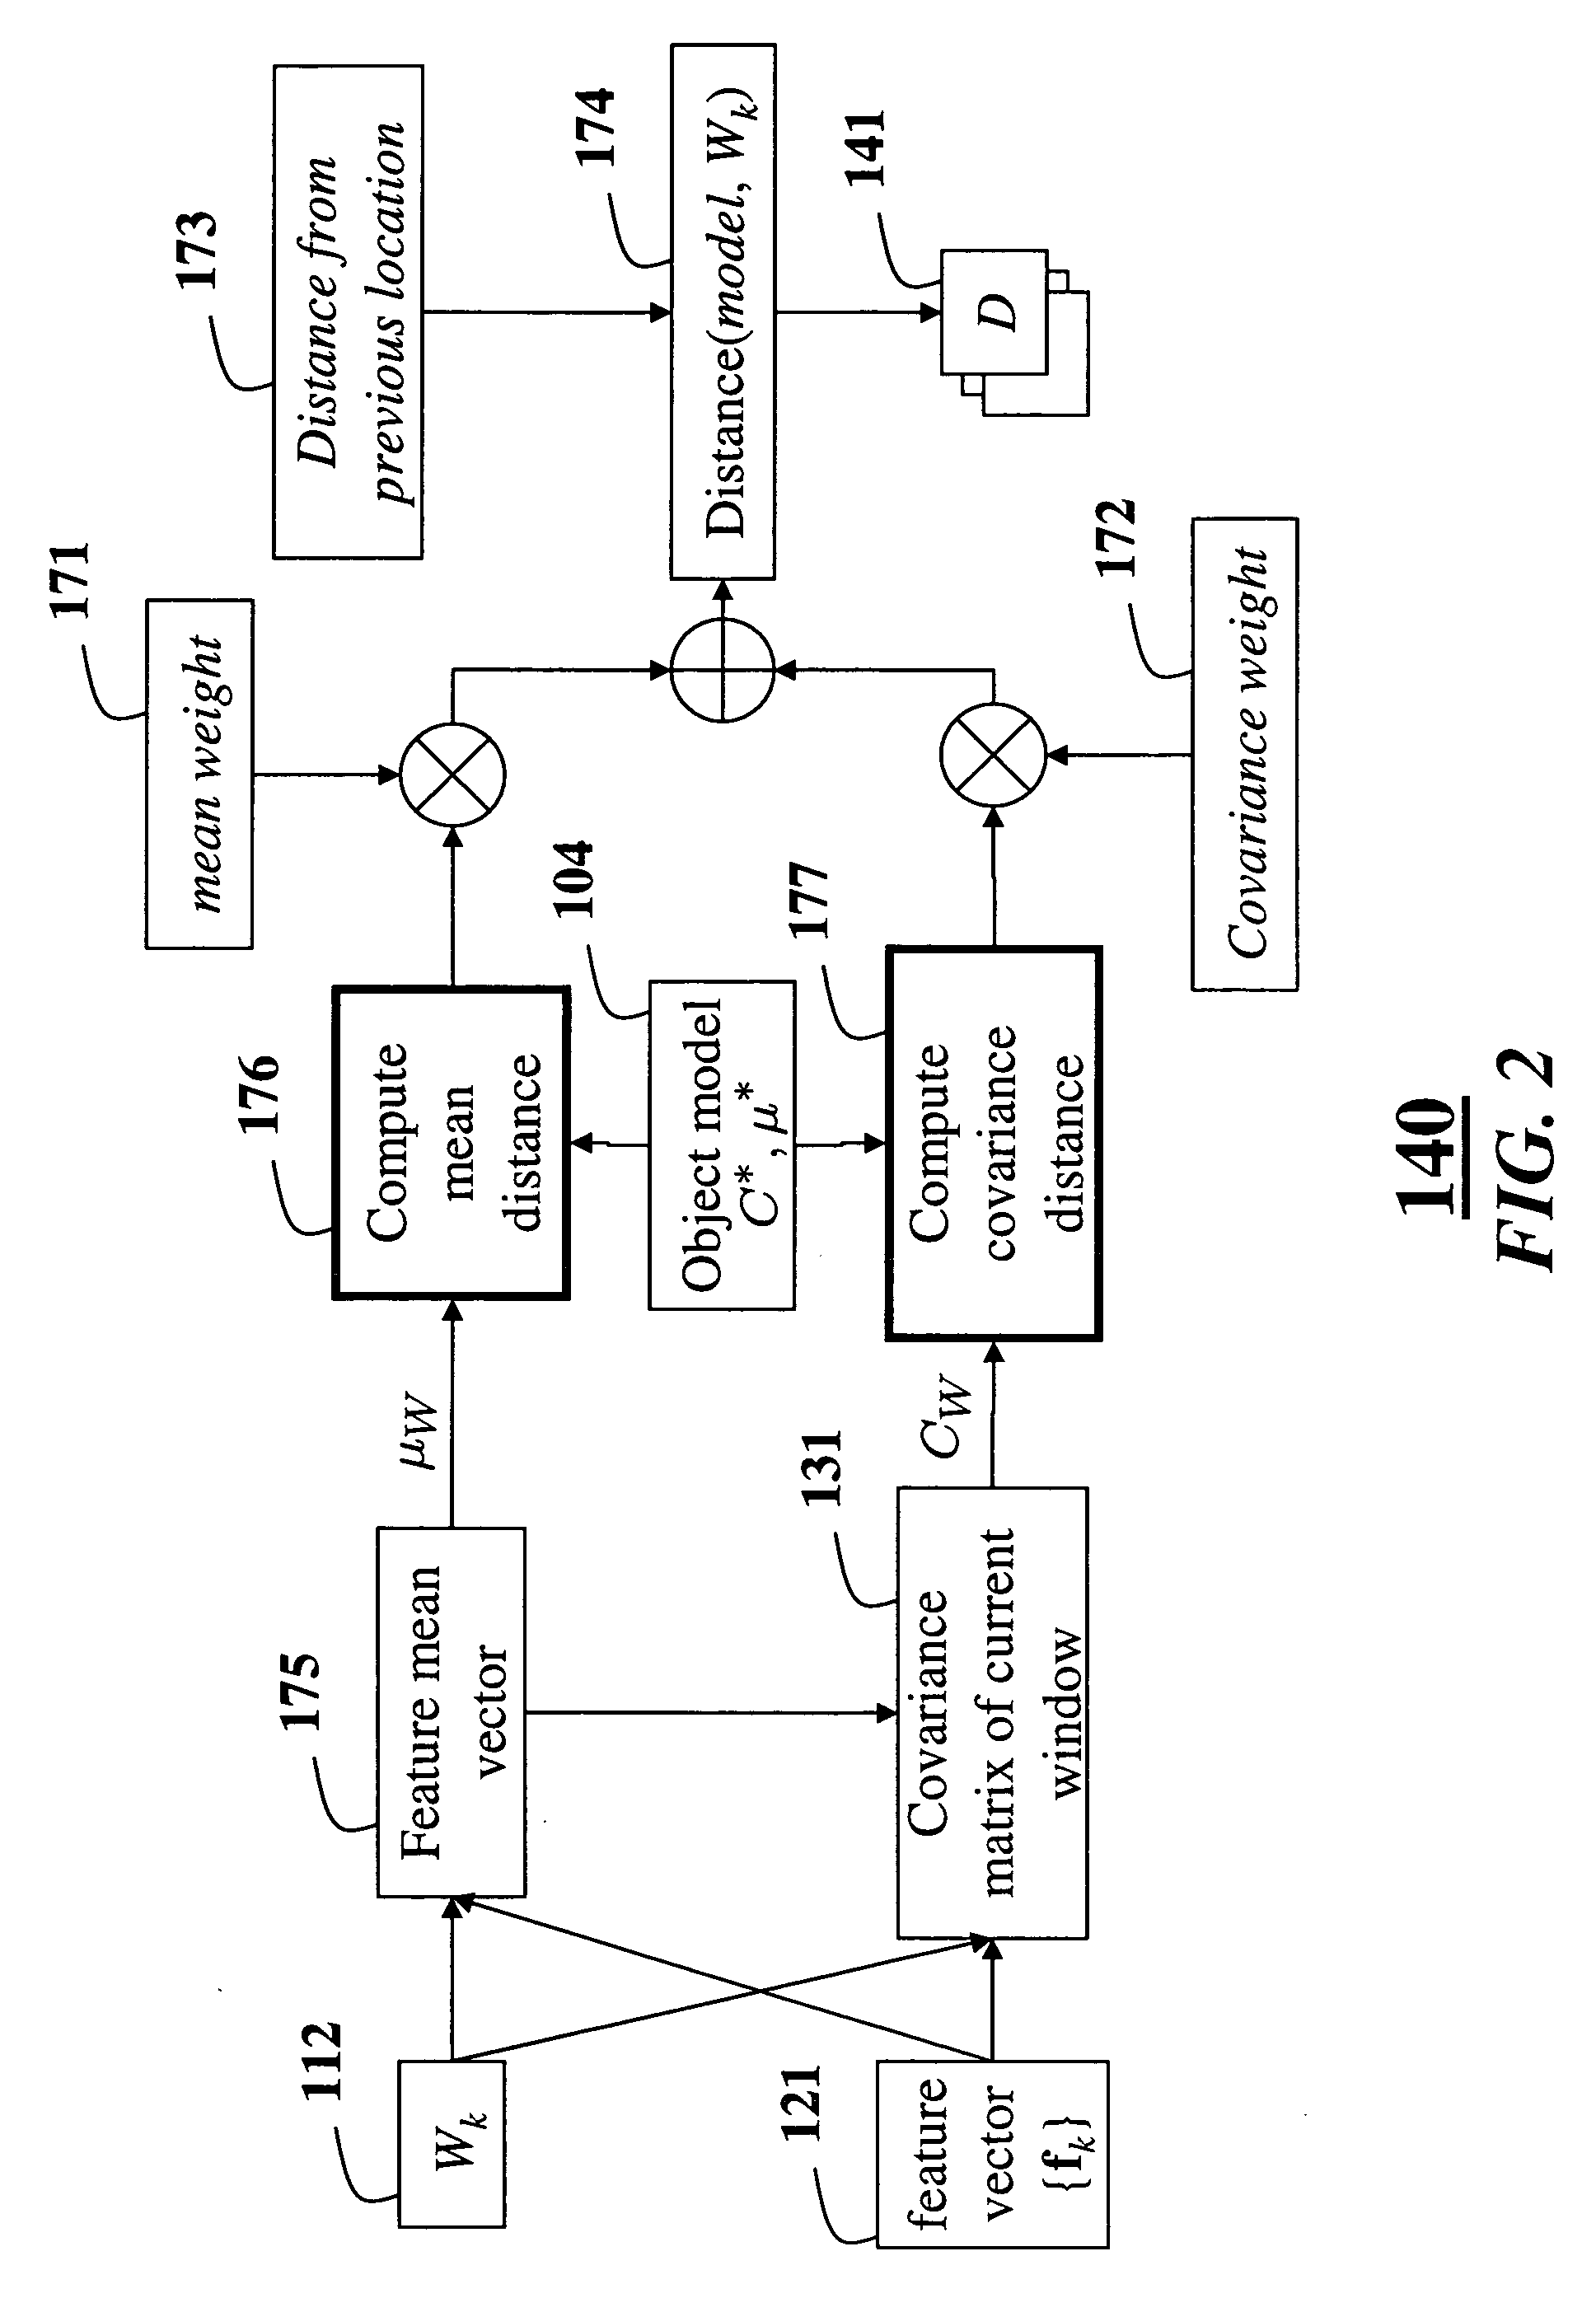 Method for tracking objects in videos using covariance matrices